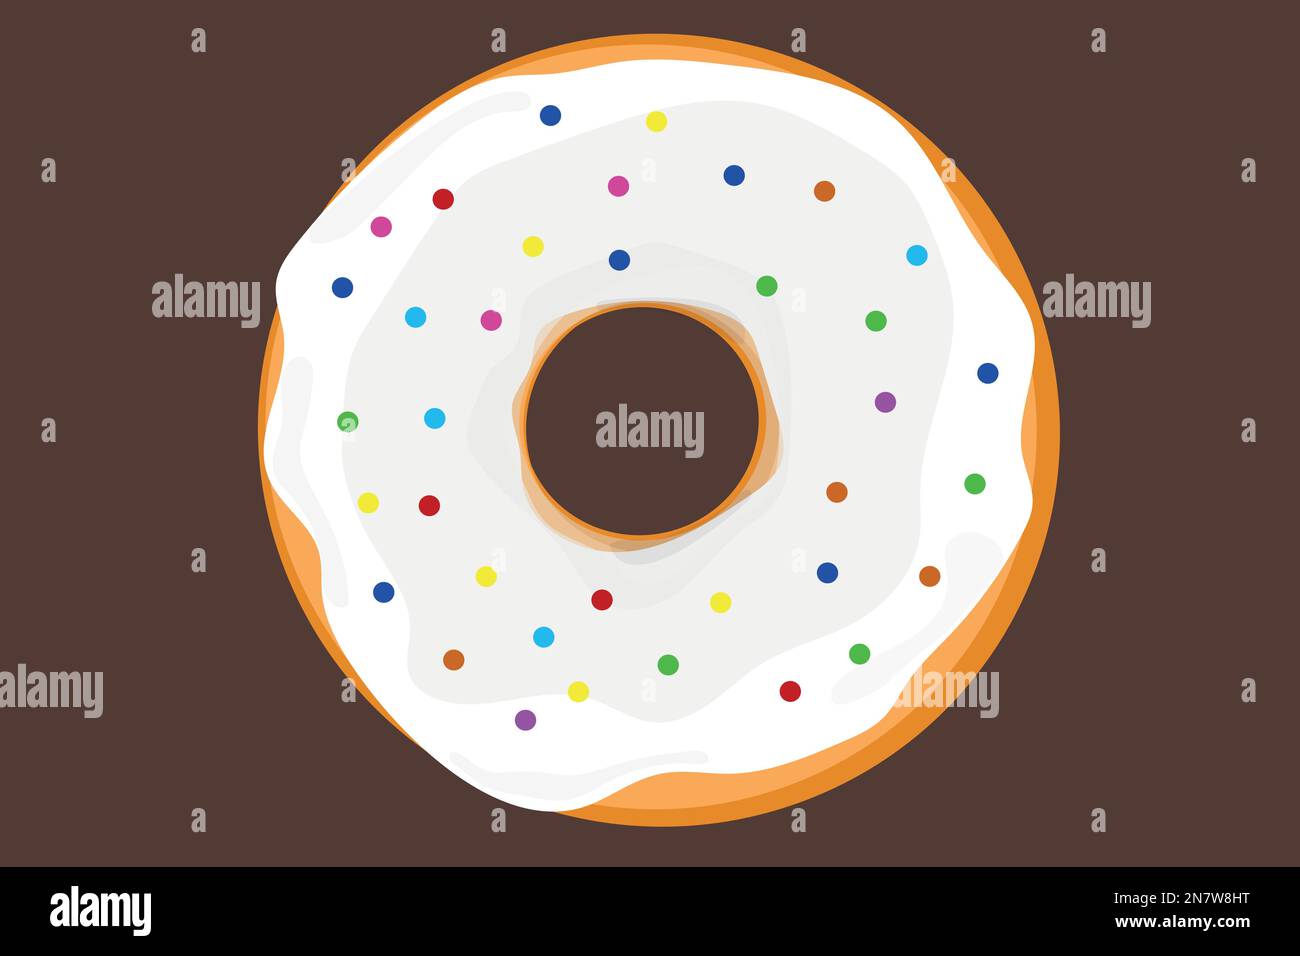 a large donut with white filling and colorful sprinkles Stock Vector